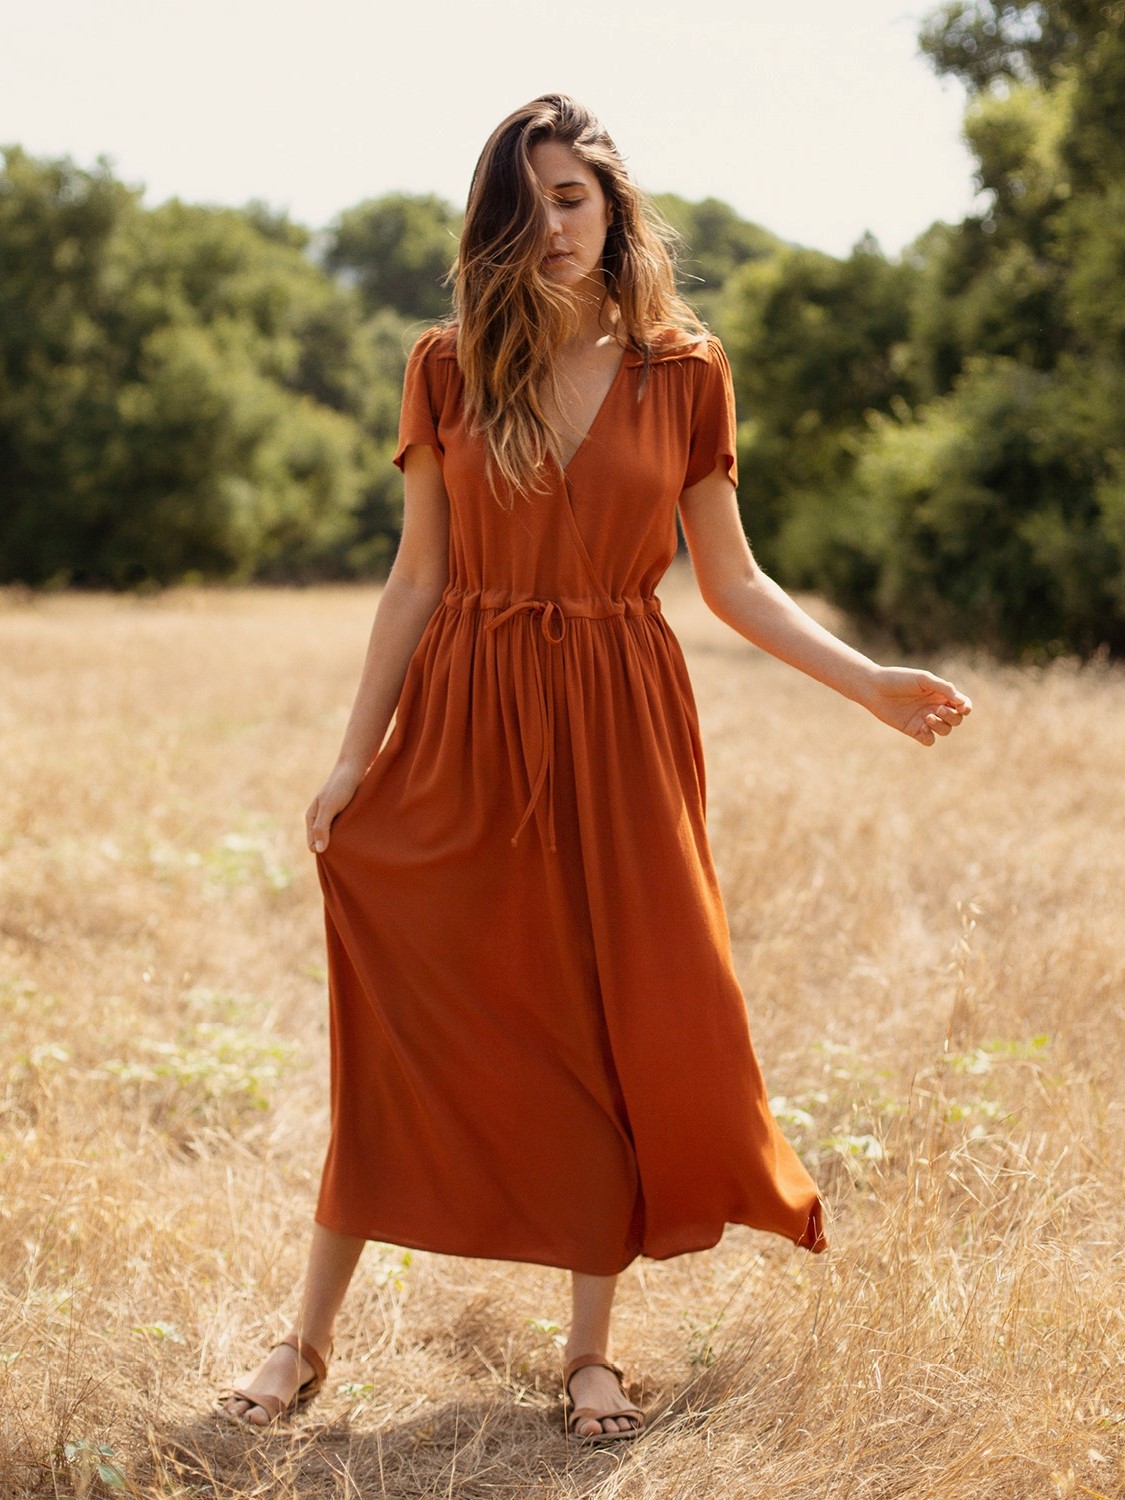 Christy Dawn ethical fashion brands dresses